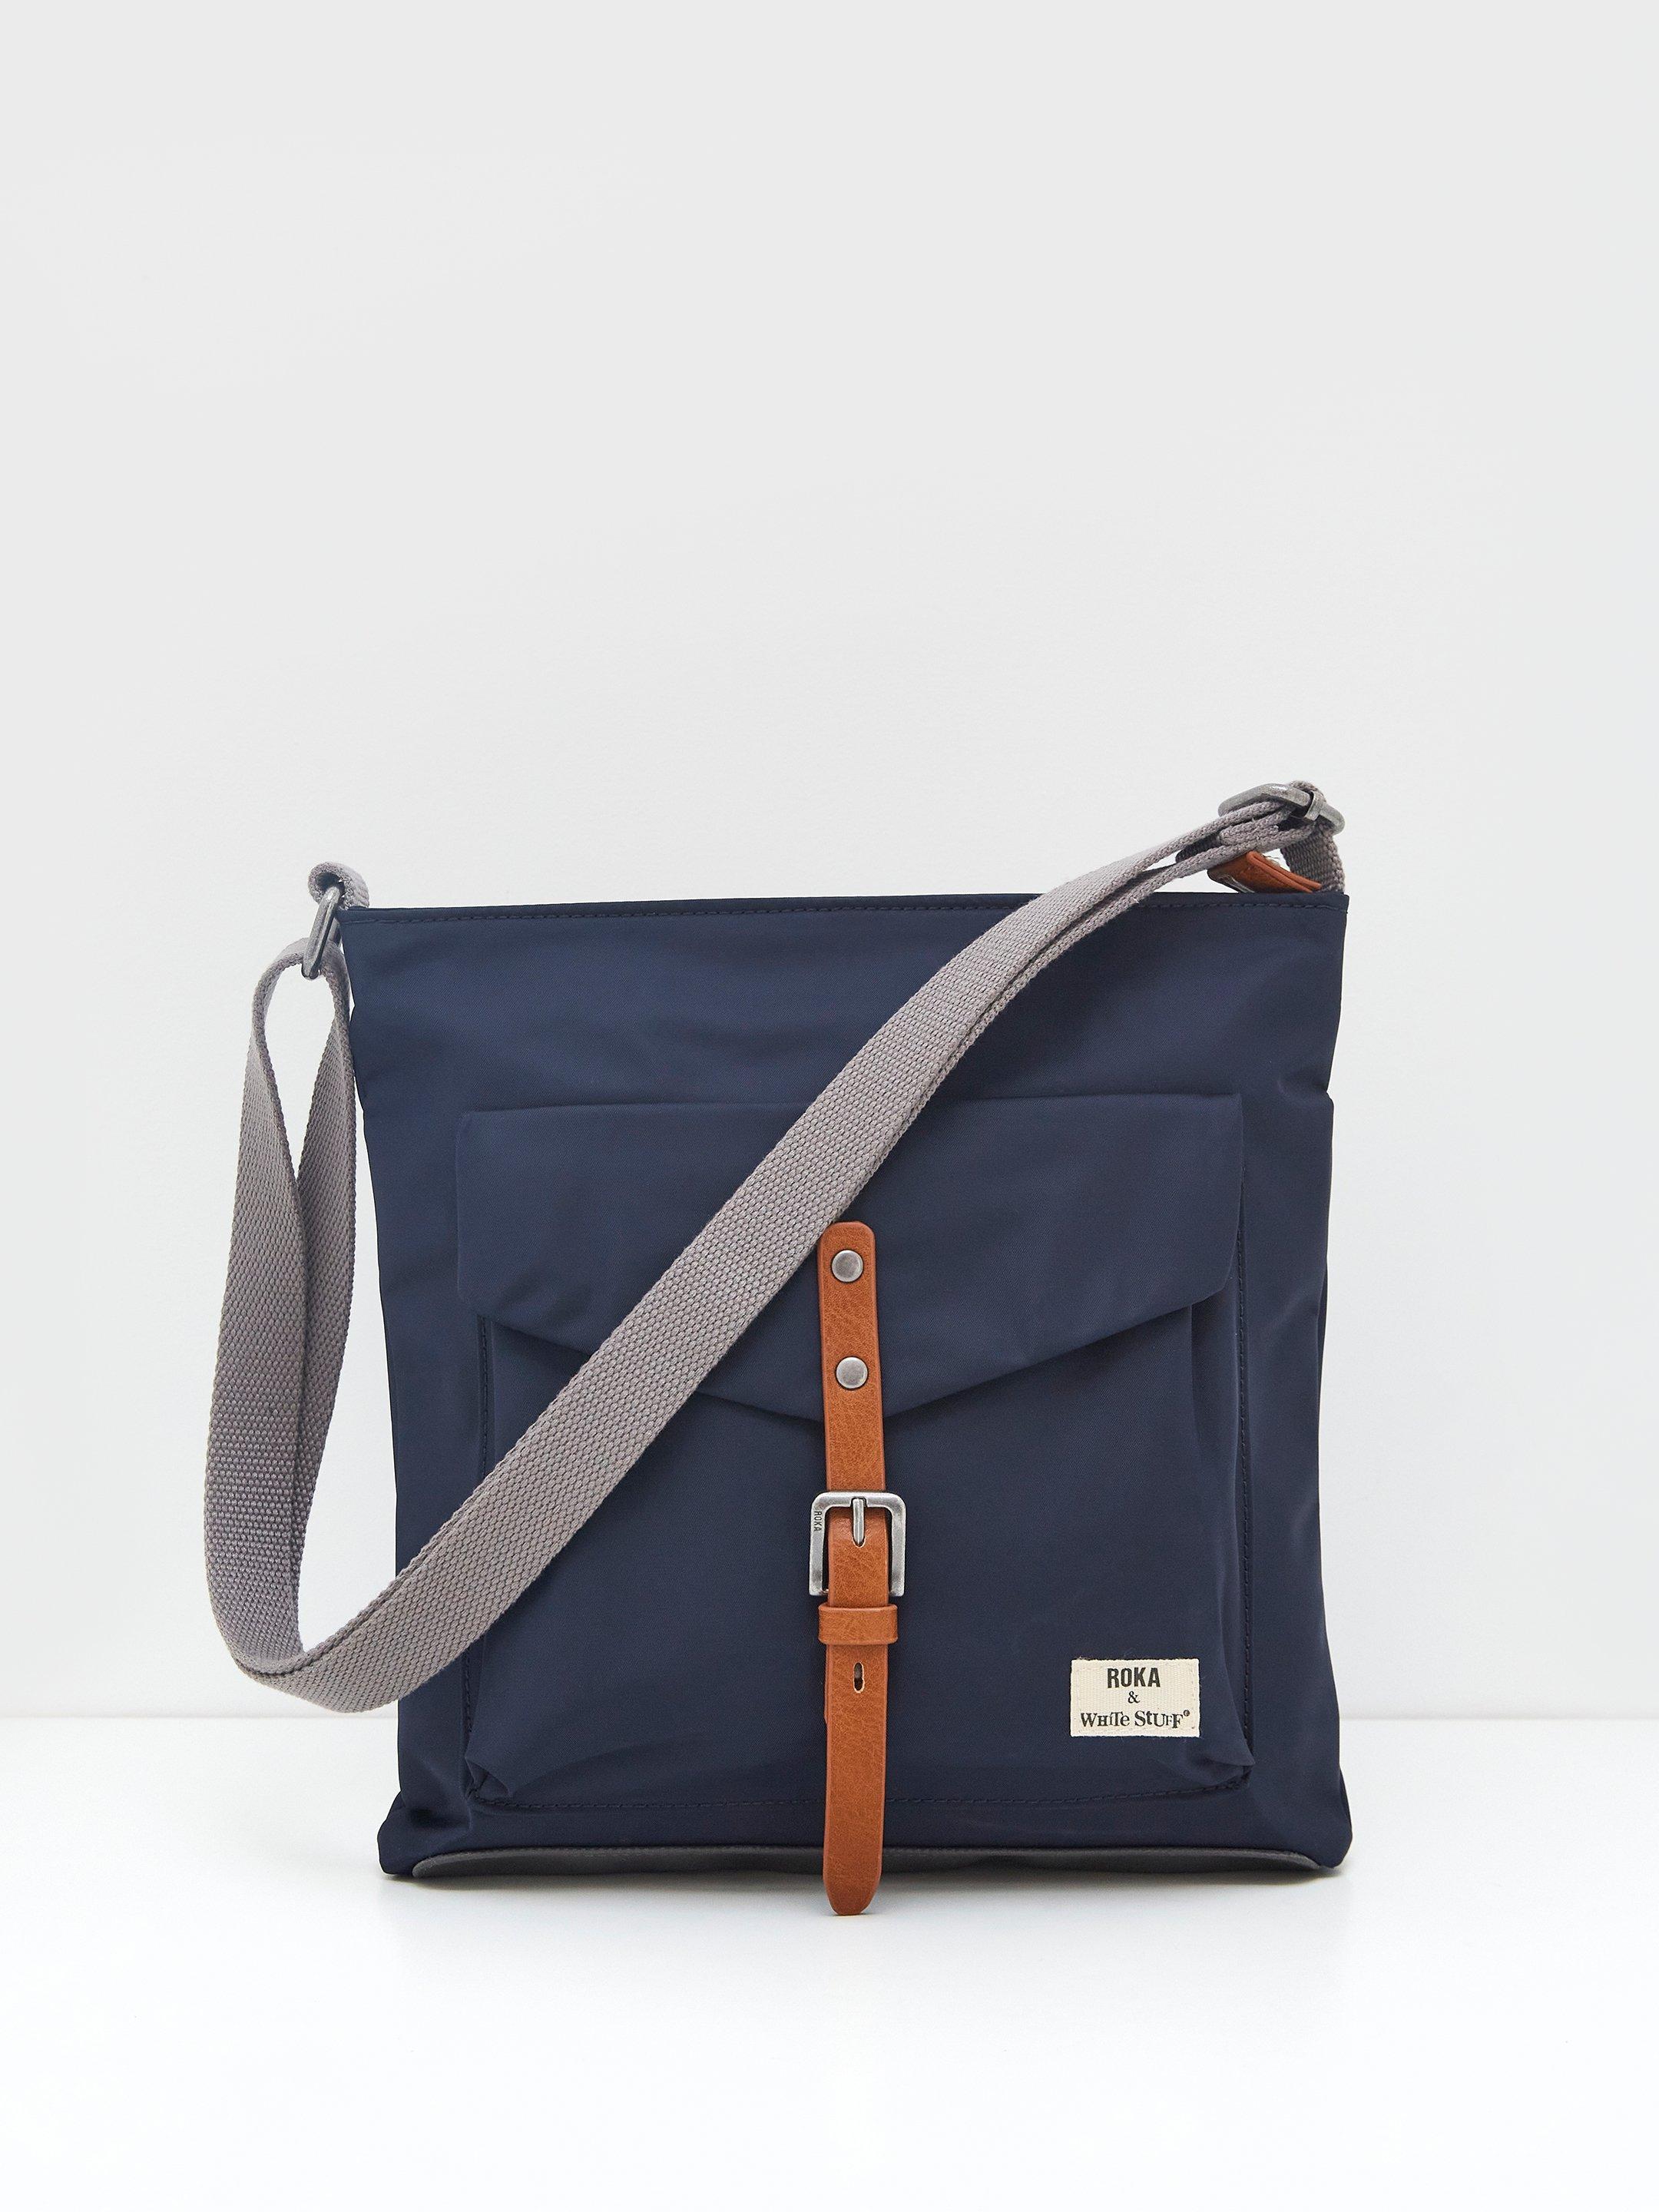 Tote Bags | Tommy Hilfiger